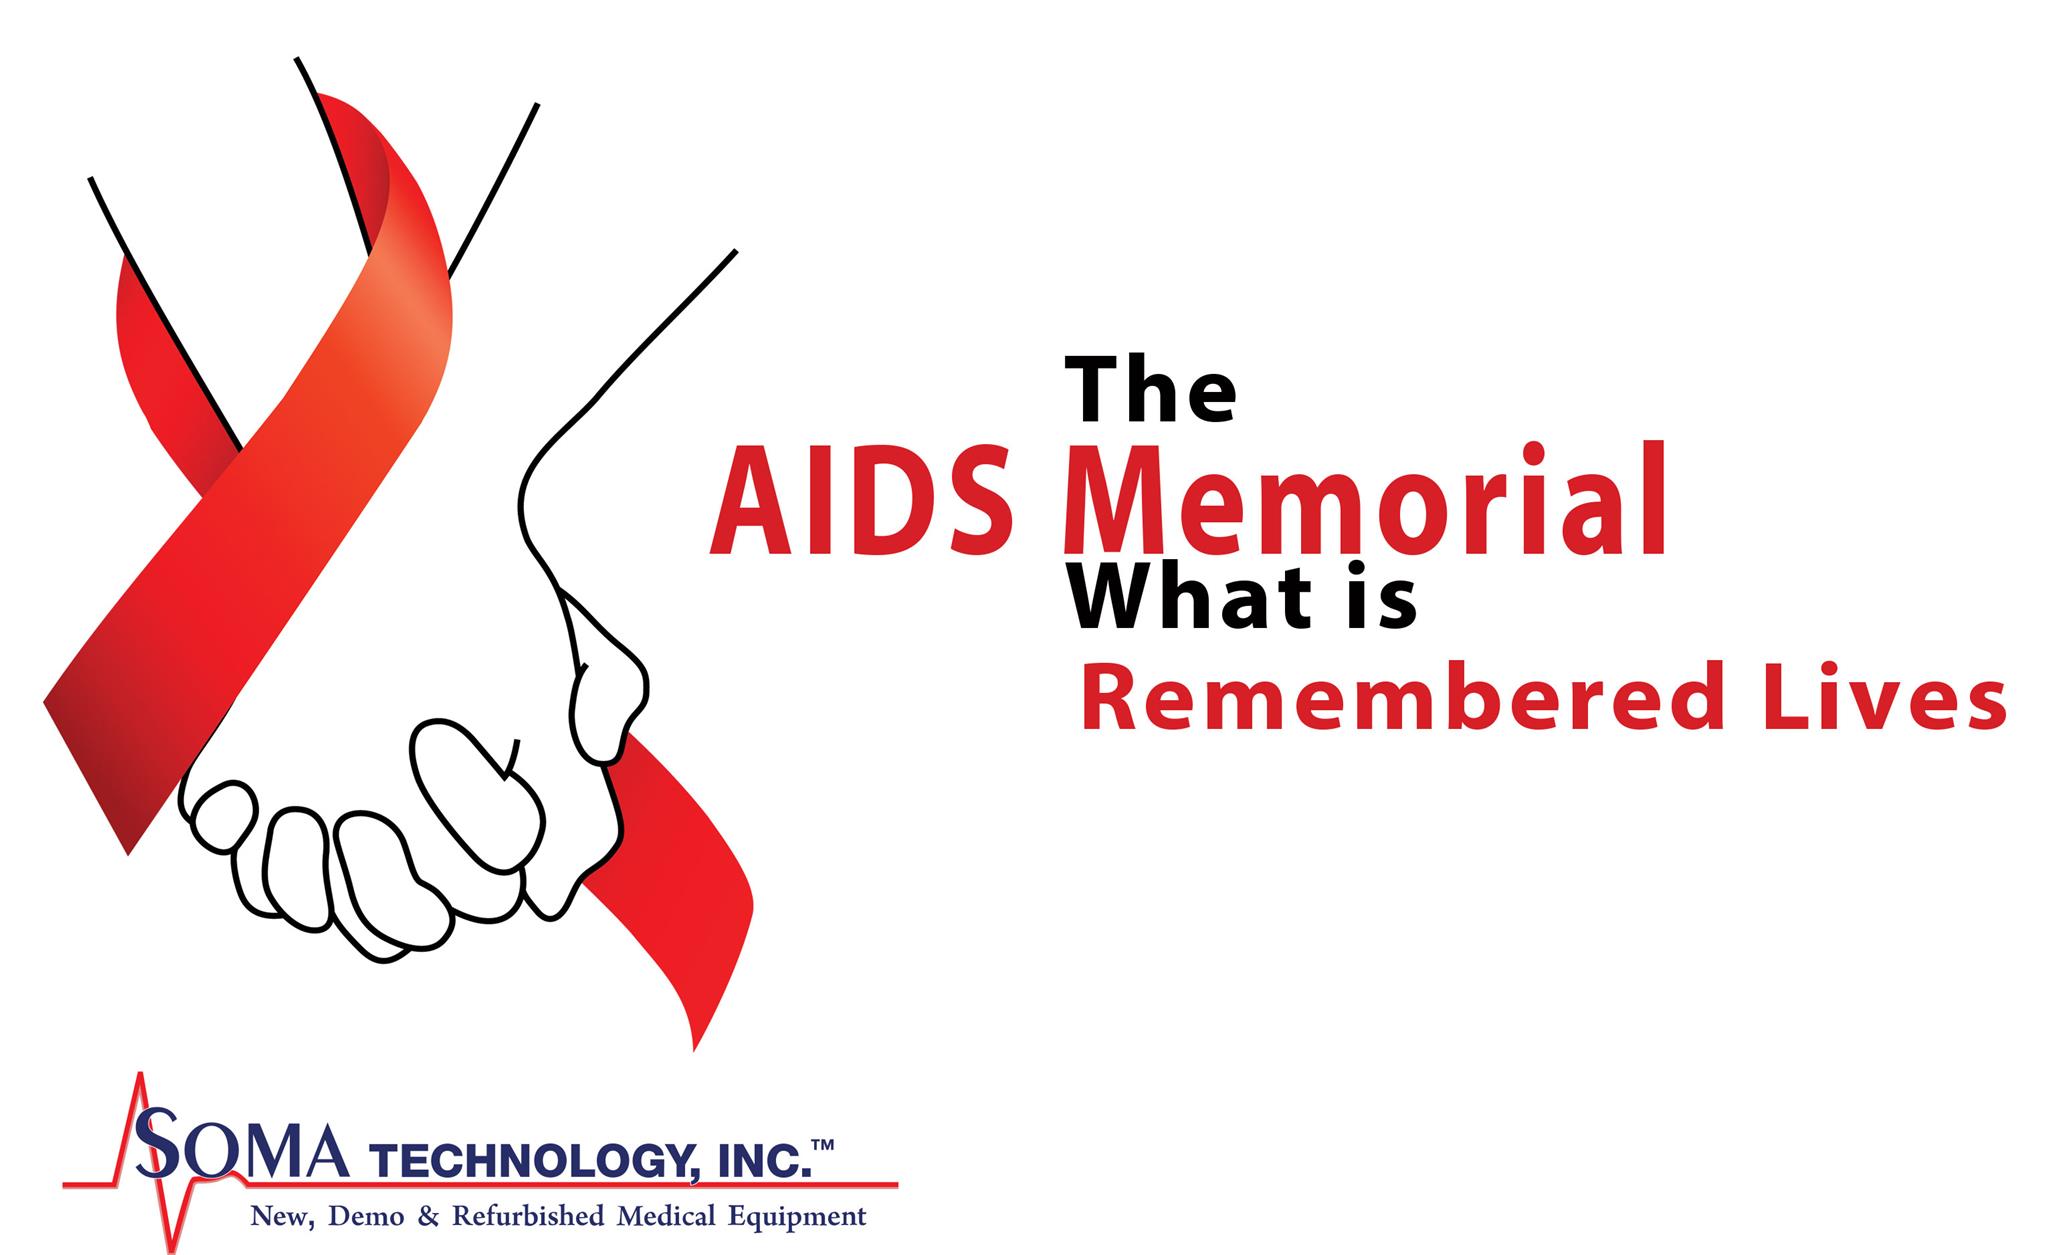 The AIDS Memorial: What is Remembered Lives